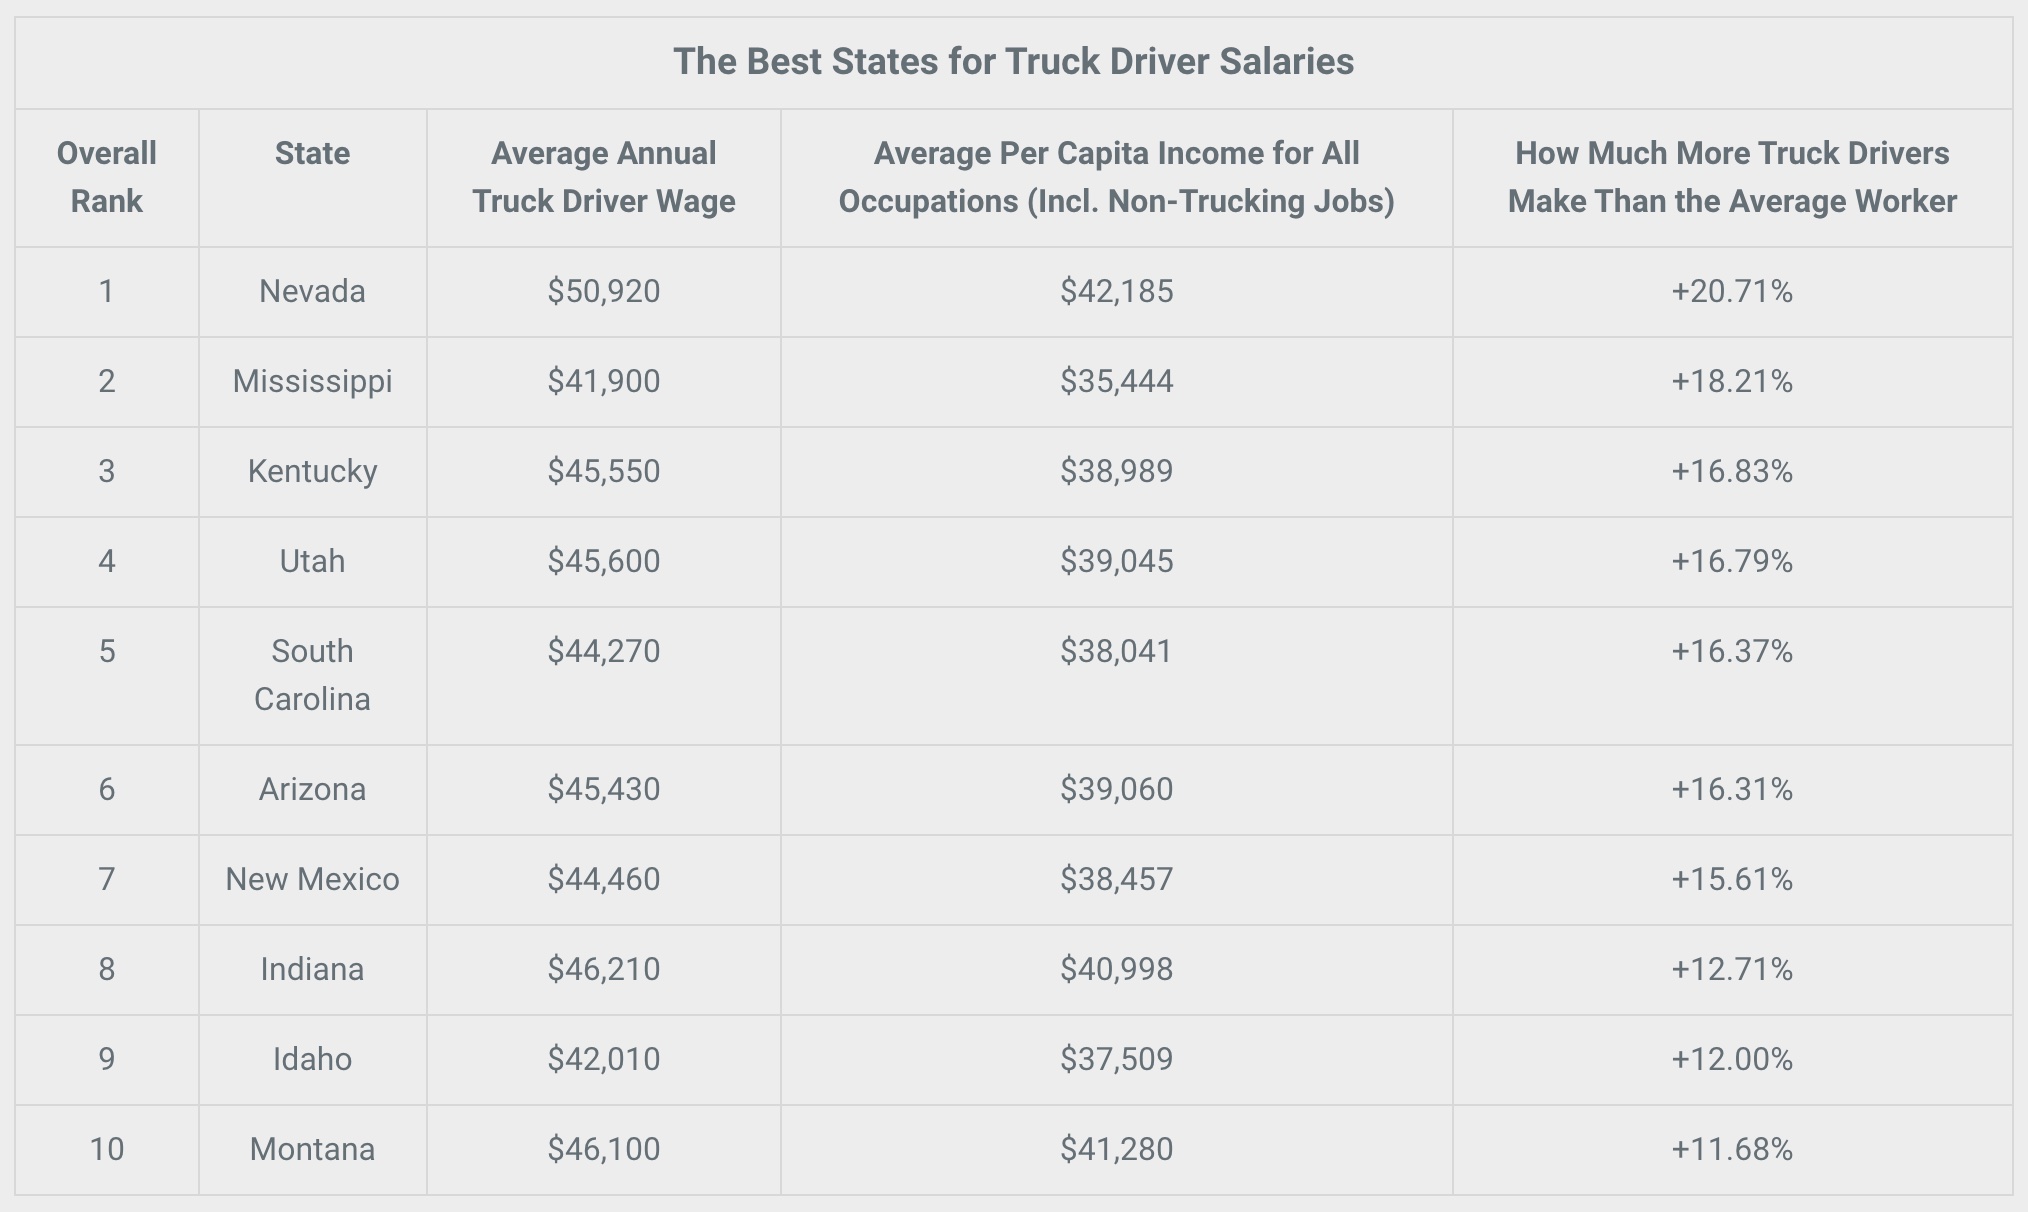 NSTS Blog 10 HIGHEST TRUCK DRIVER SALARIES BY STATE IN 2021